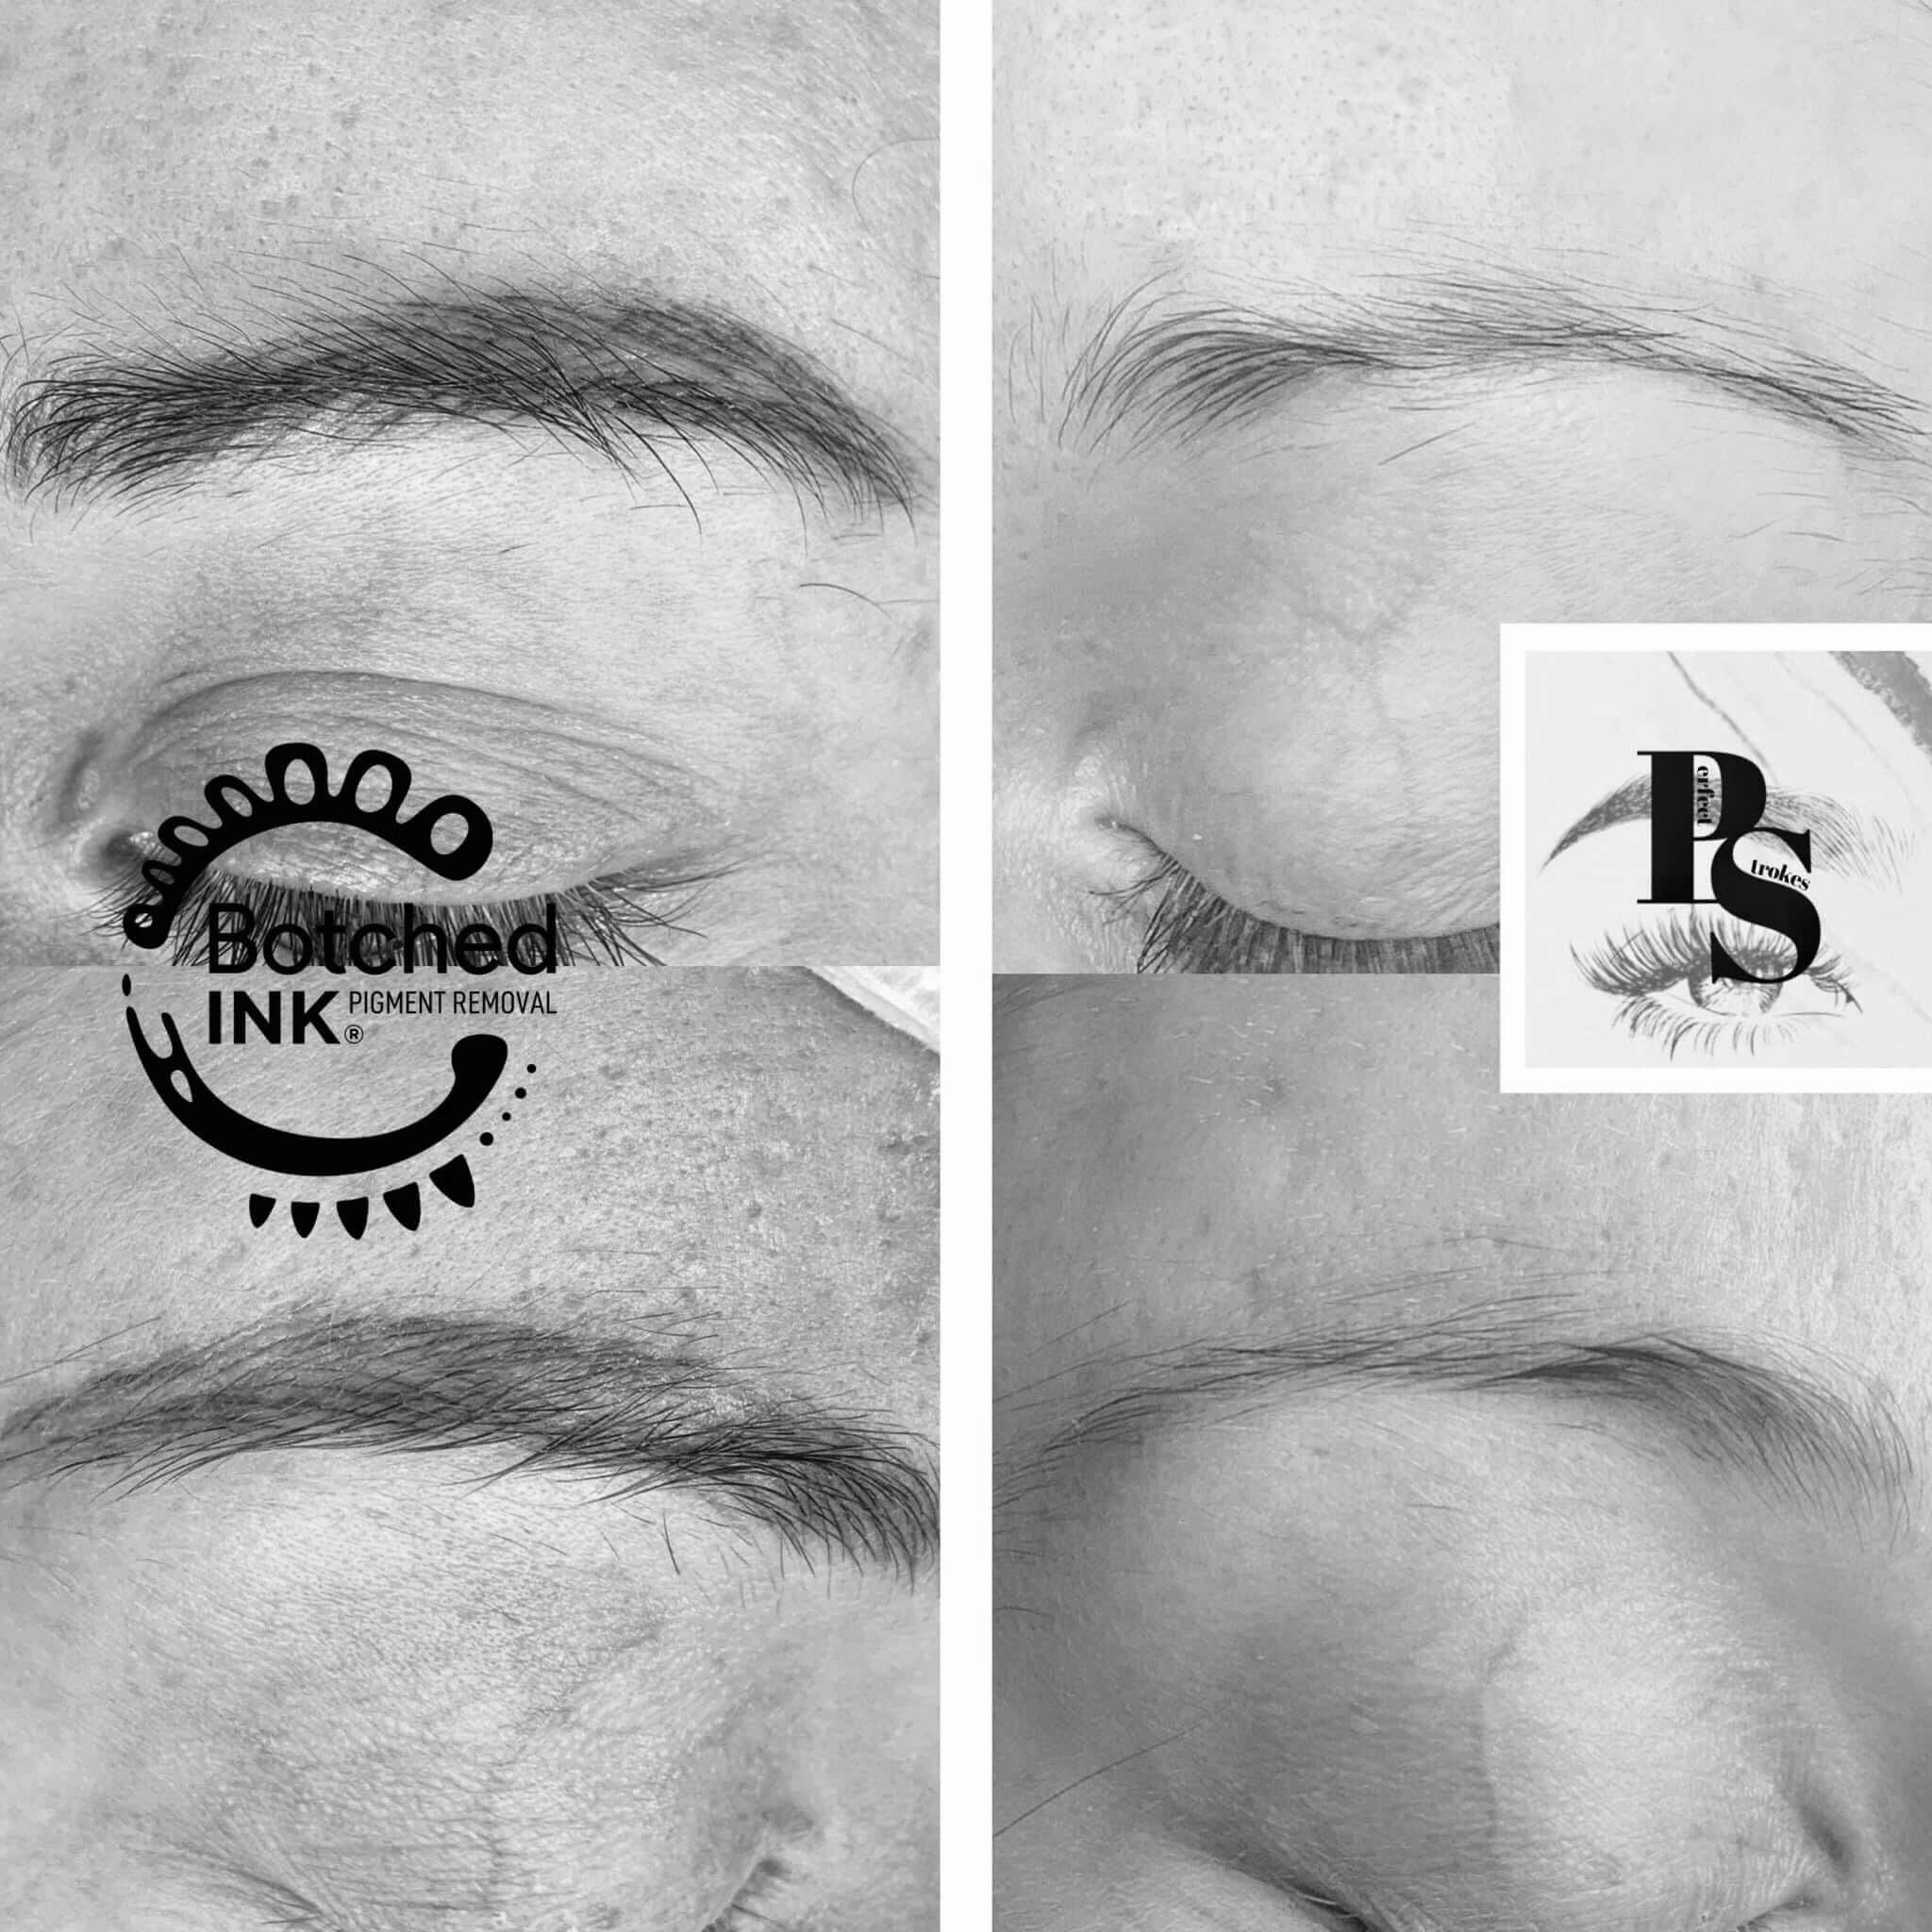 Tattooed Eyebrows Gone Wrong What Can Happen and What to Do